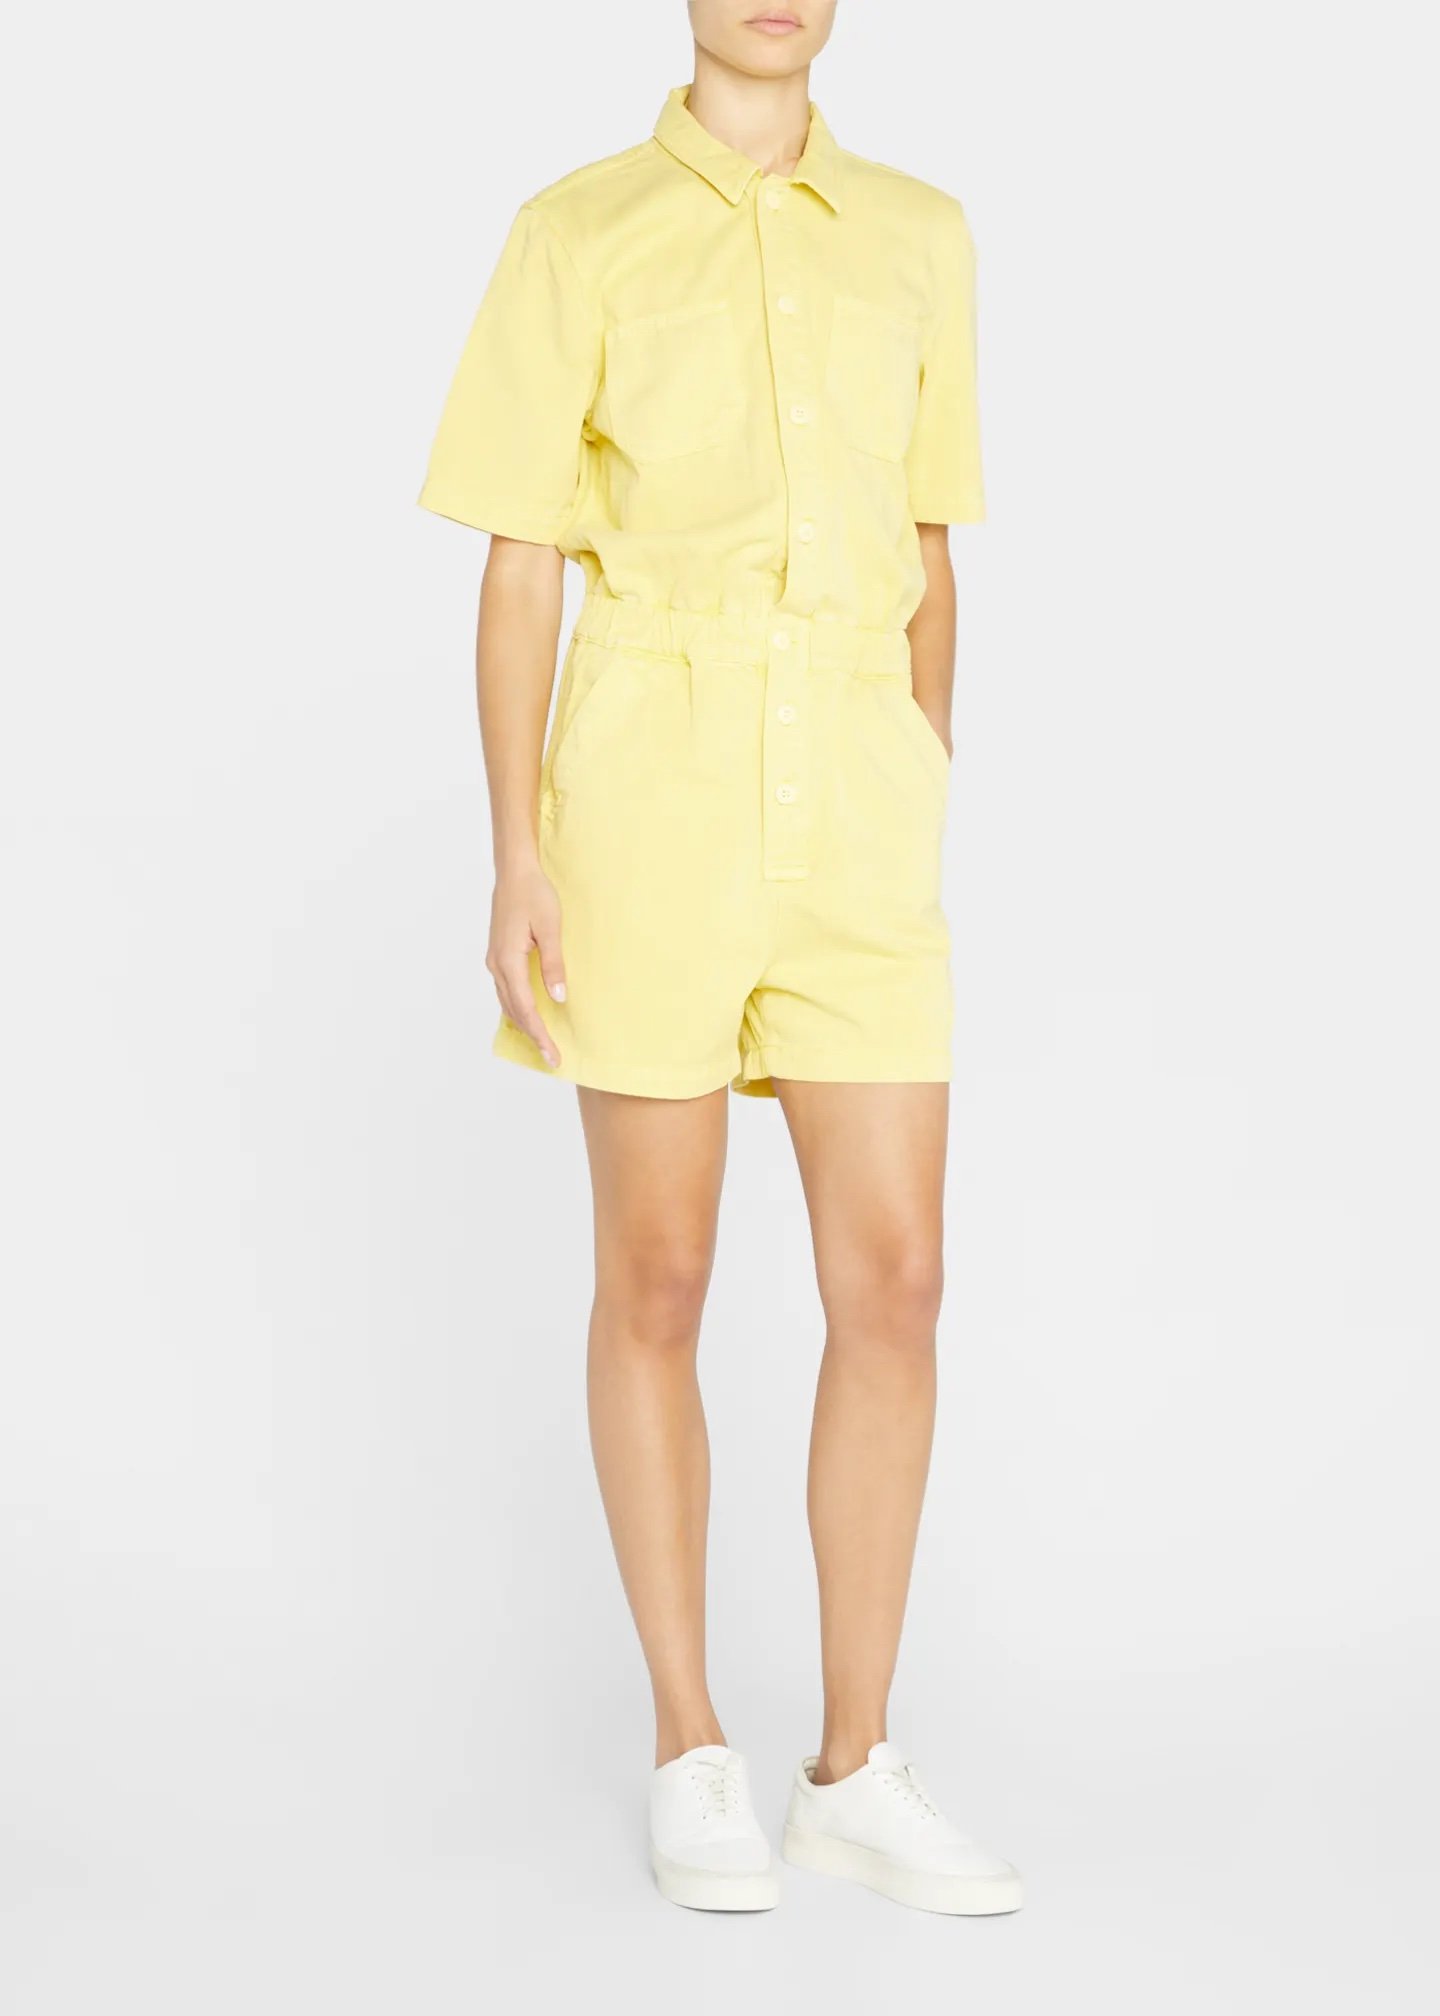 The Springy Short Button-Front Utility Romper